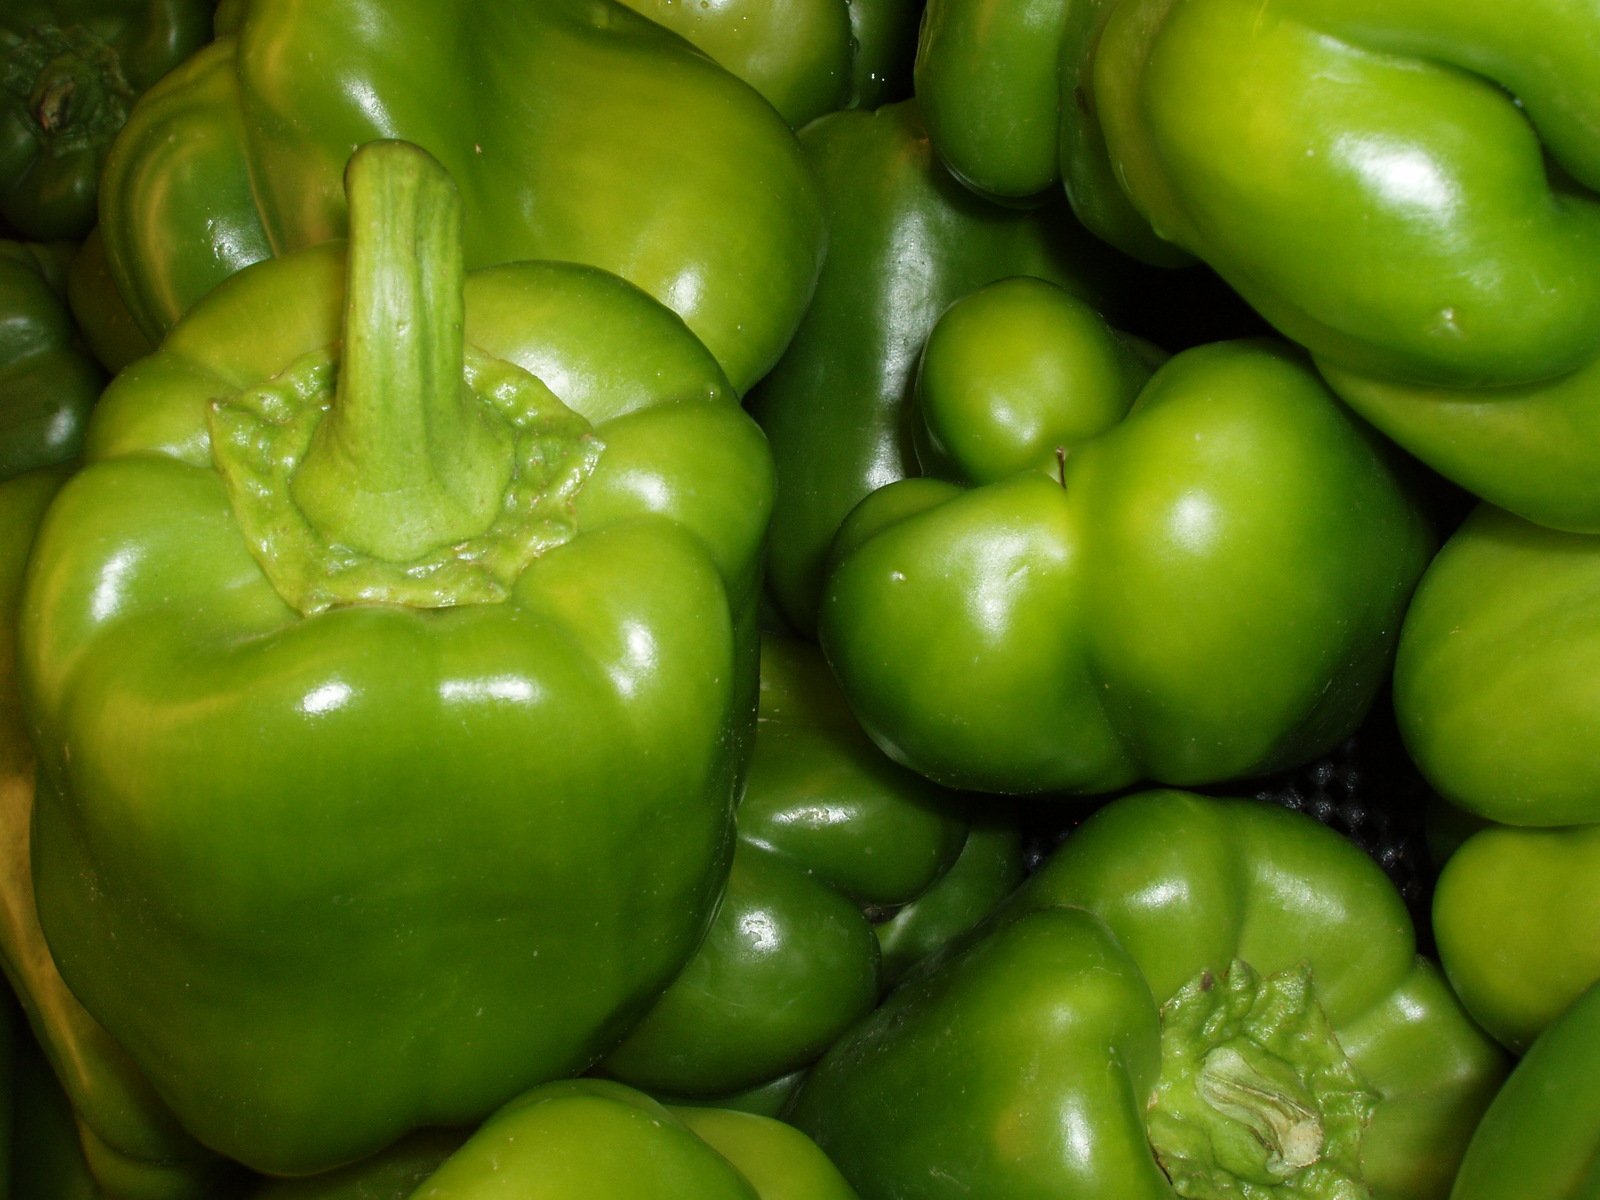 green peppers sit piled next to each other